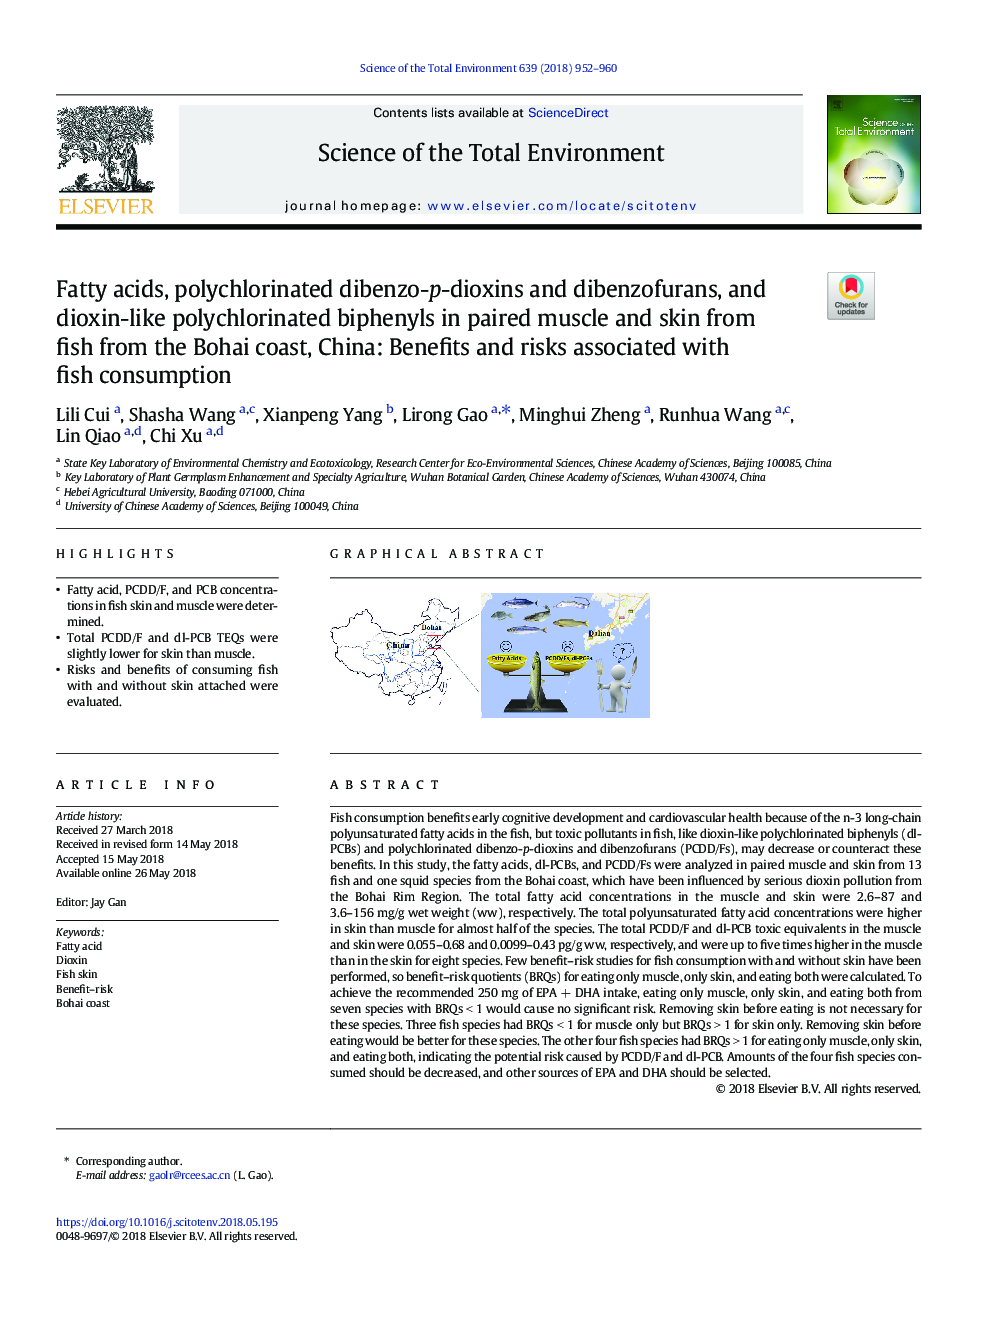 Fatty acids, polychlorinated dibenzo-p-dioxins and dibenzofurans, and dioxin-like polychlorinated biphenyls in paired muscle and skin from fish from the Bohai coast, China: Benefits and risks associated with fish consumption